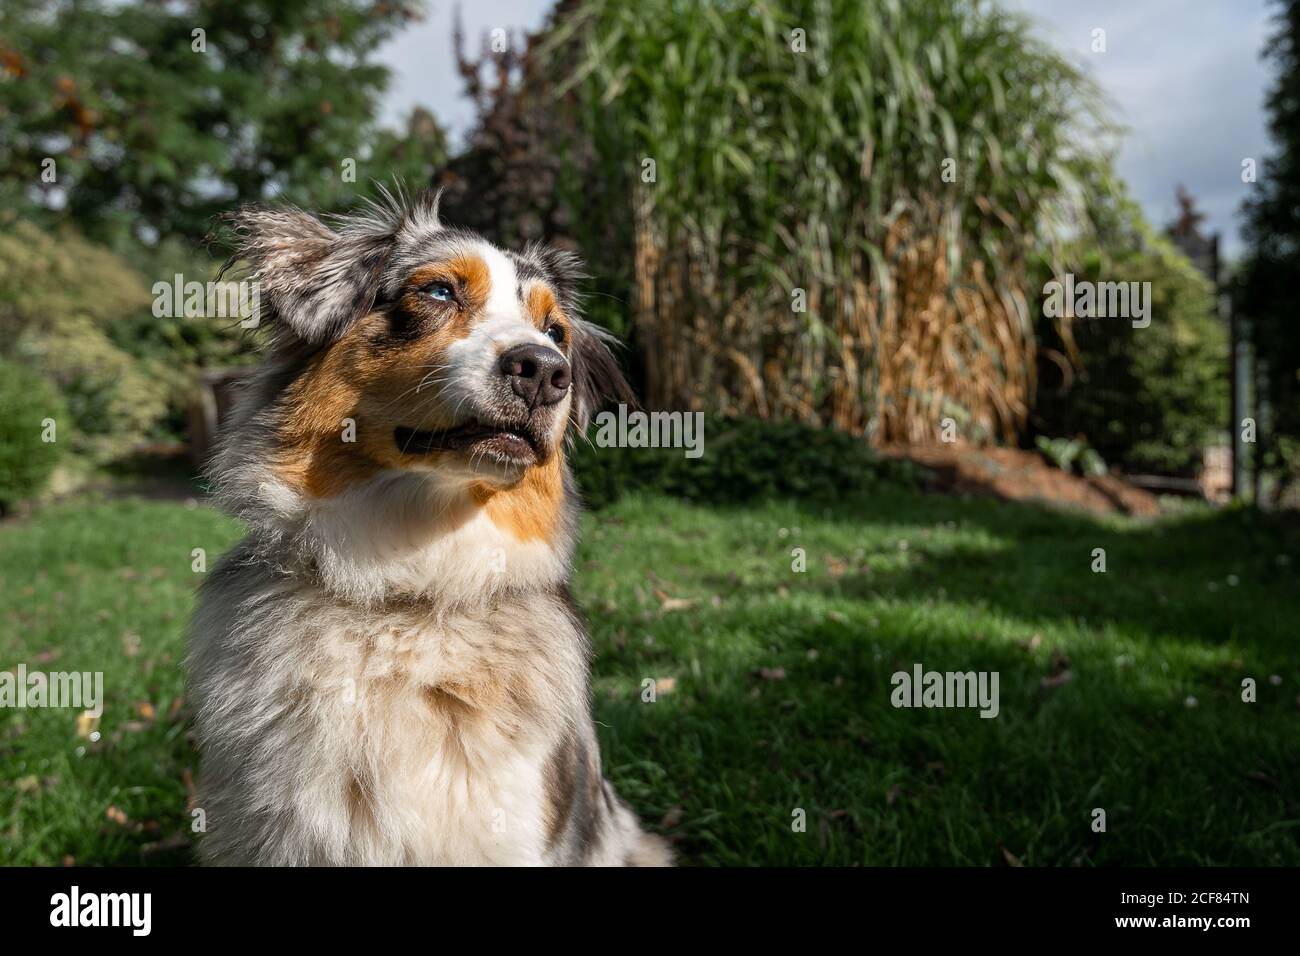 an australian shepherd wide angle shot sitting on the green gras looking to the side smiling Stock Photo